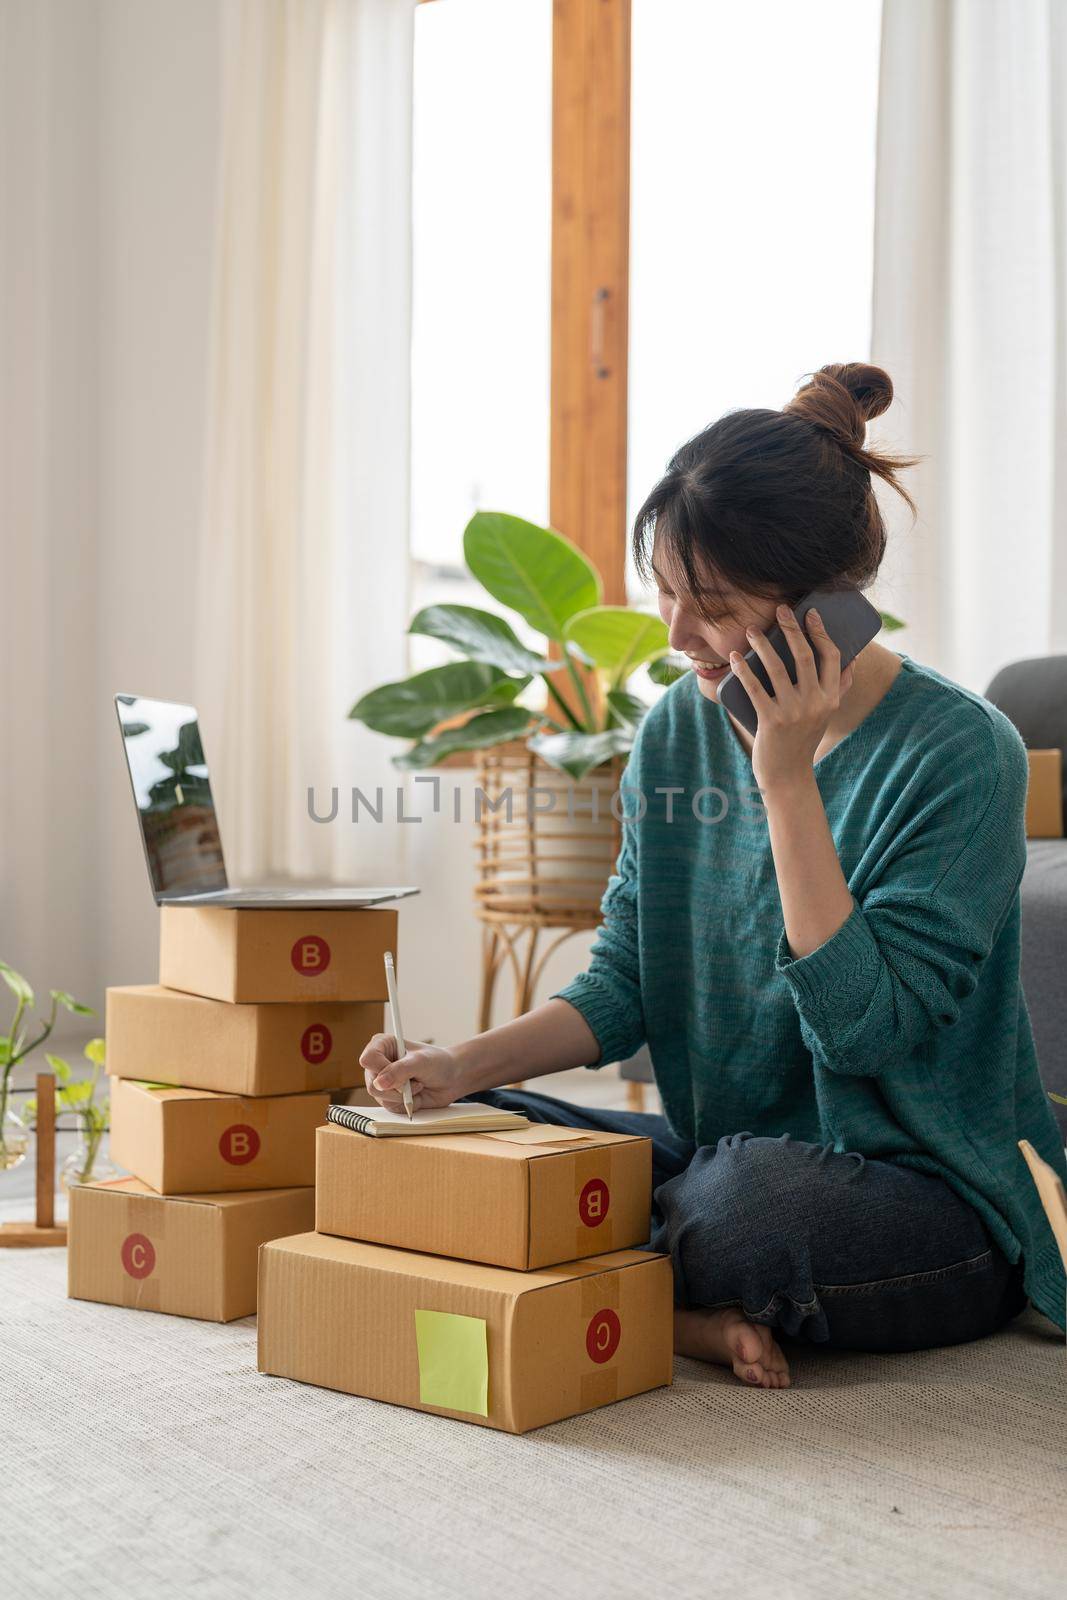 Entrepreneurs Small Business SME Independent woman work at home use smartphones and laptops for commercial checking, online marketing, packing boxes, SME sellers, concept, e-commerce team, online sales.